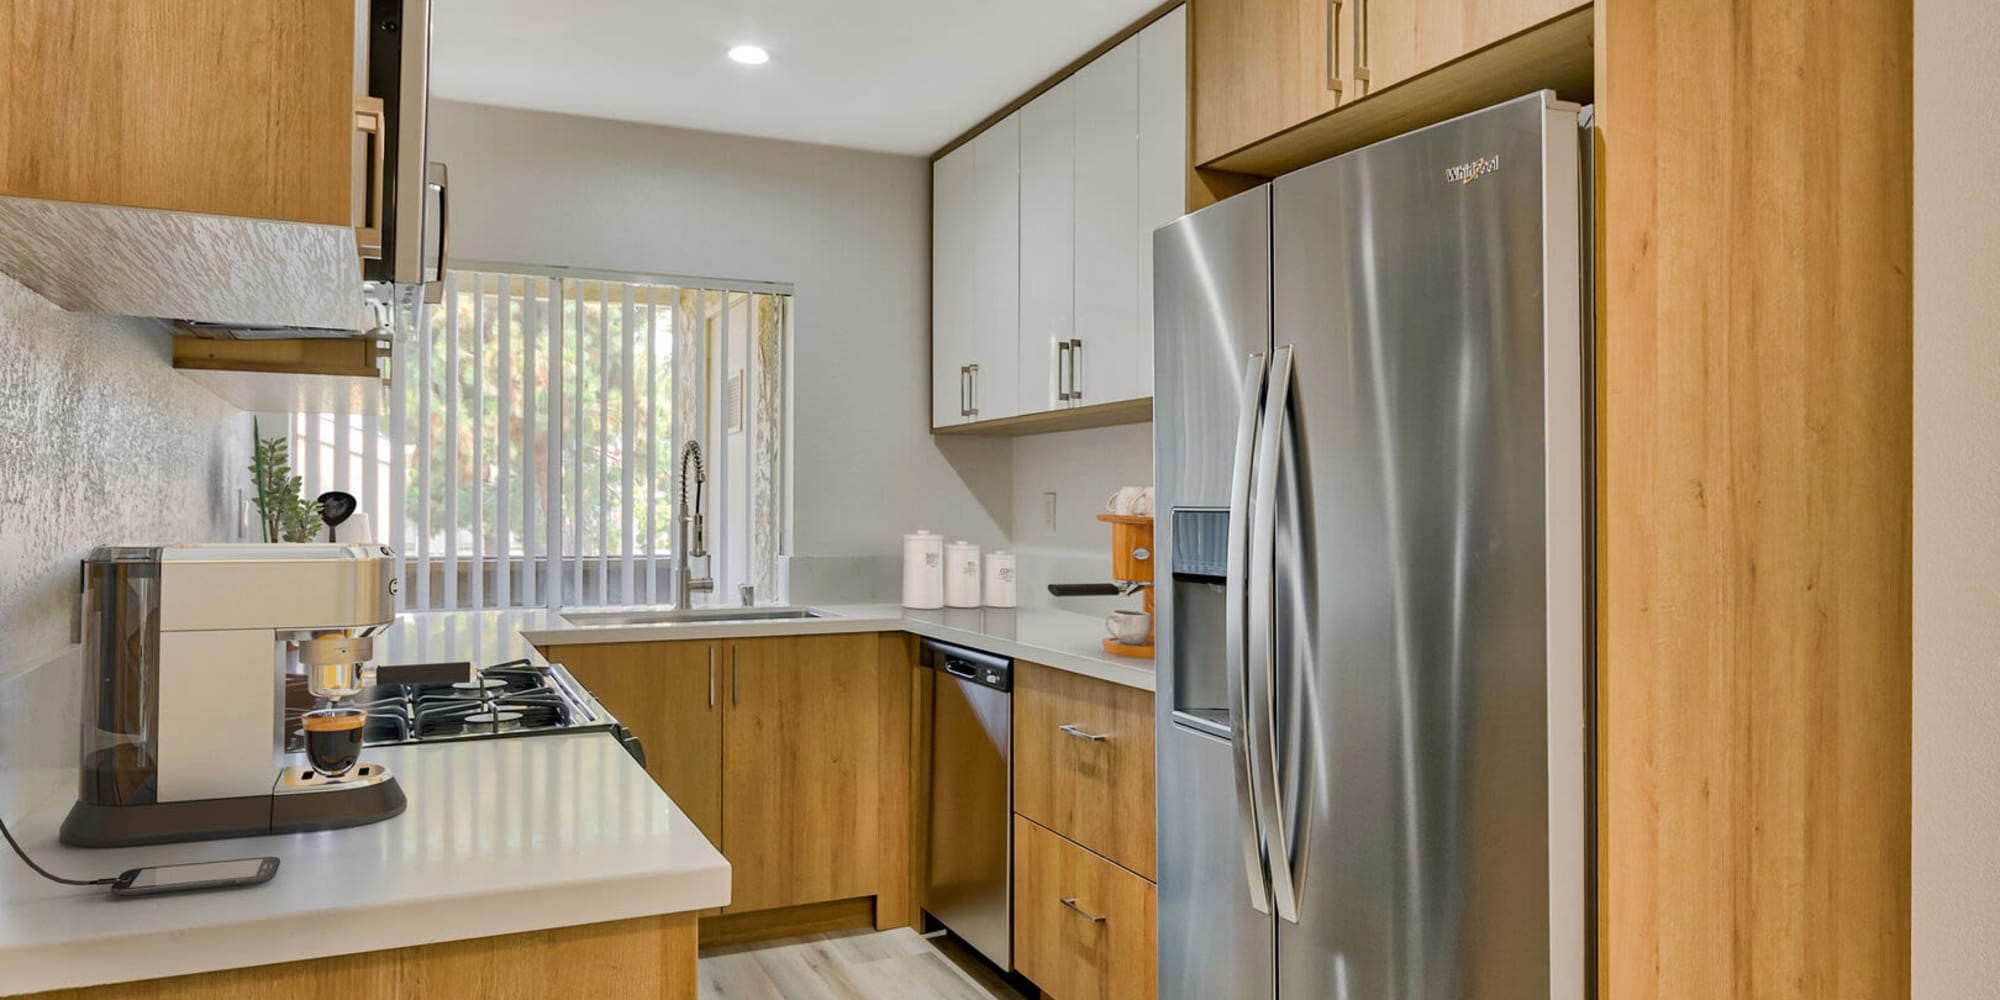 Kitchen and living space at Torrey Pines Apartment Homes in West Covina, California